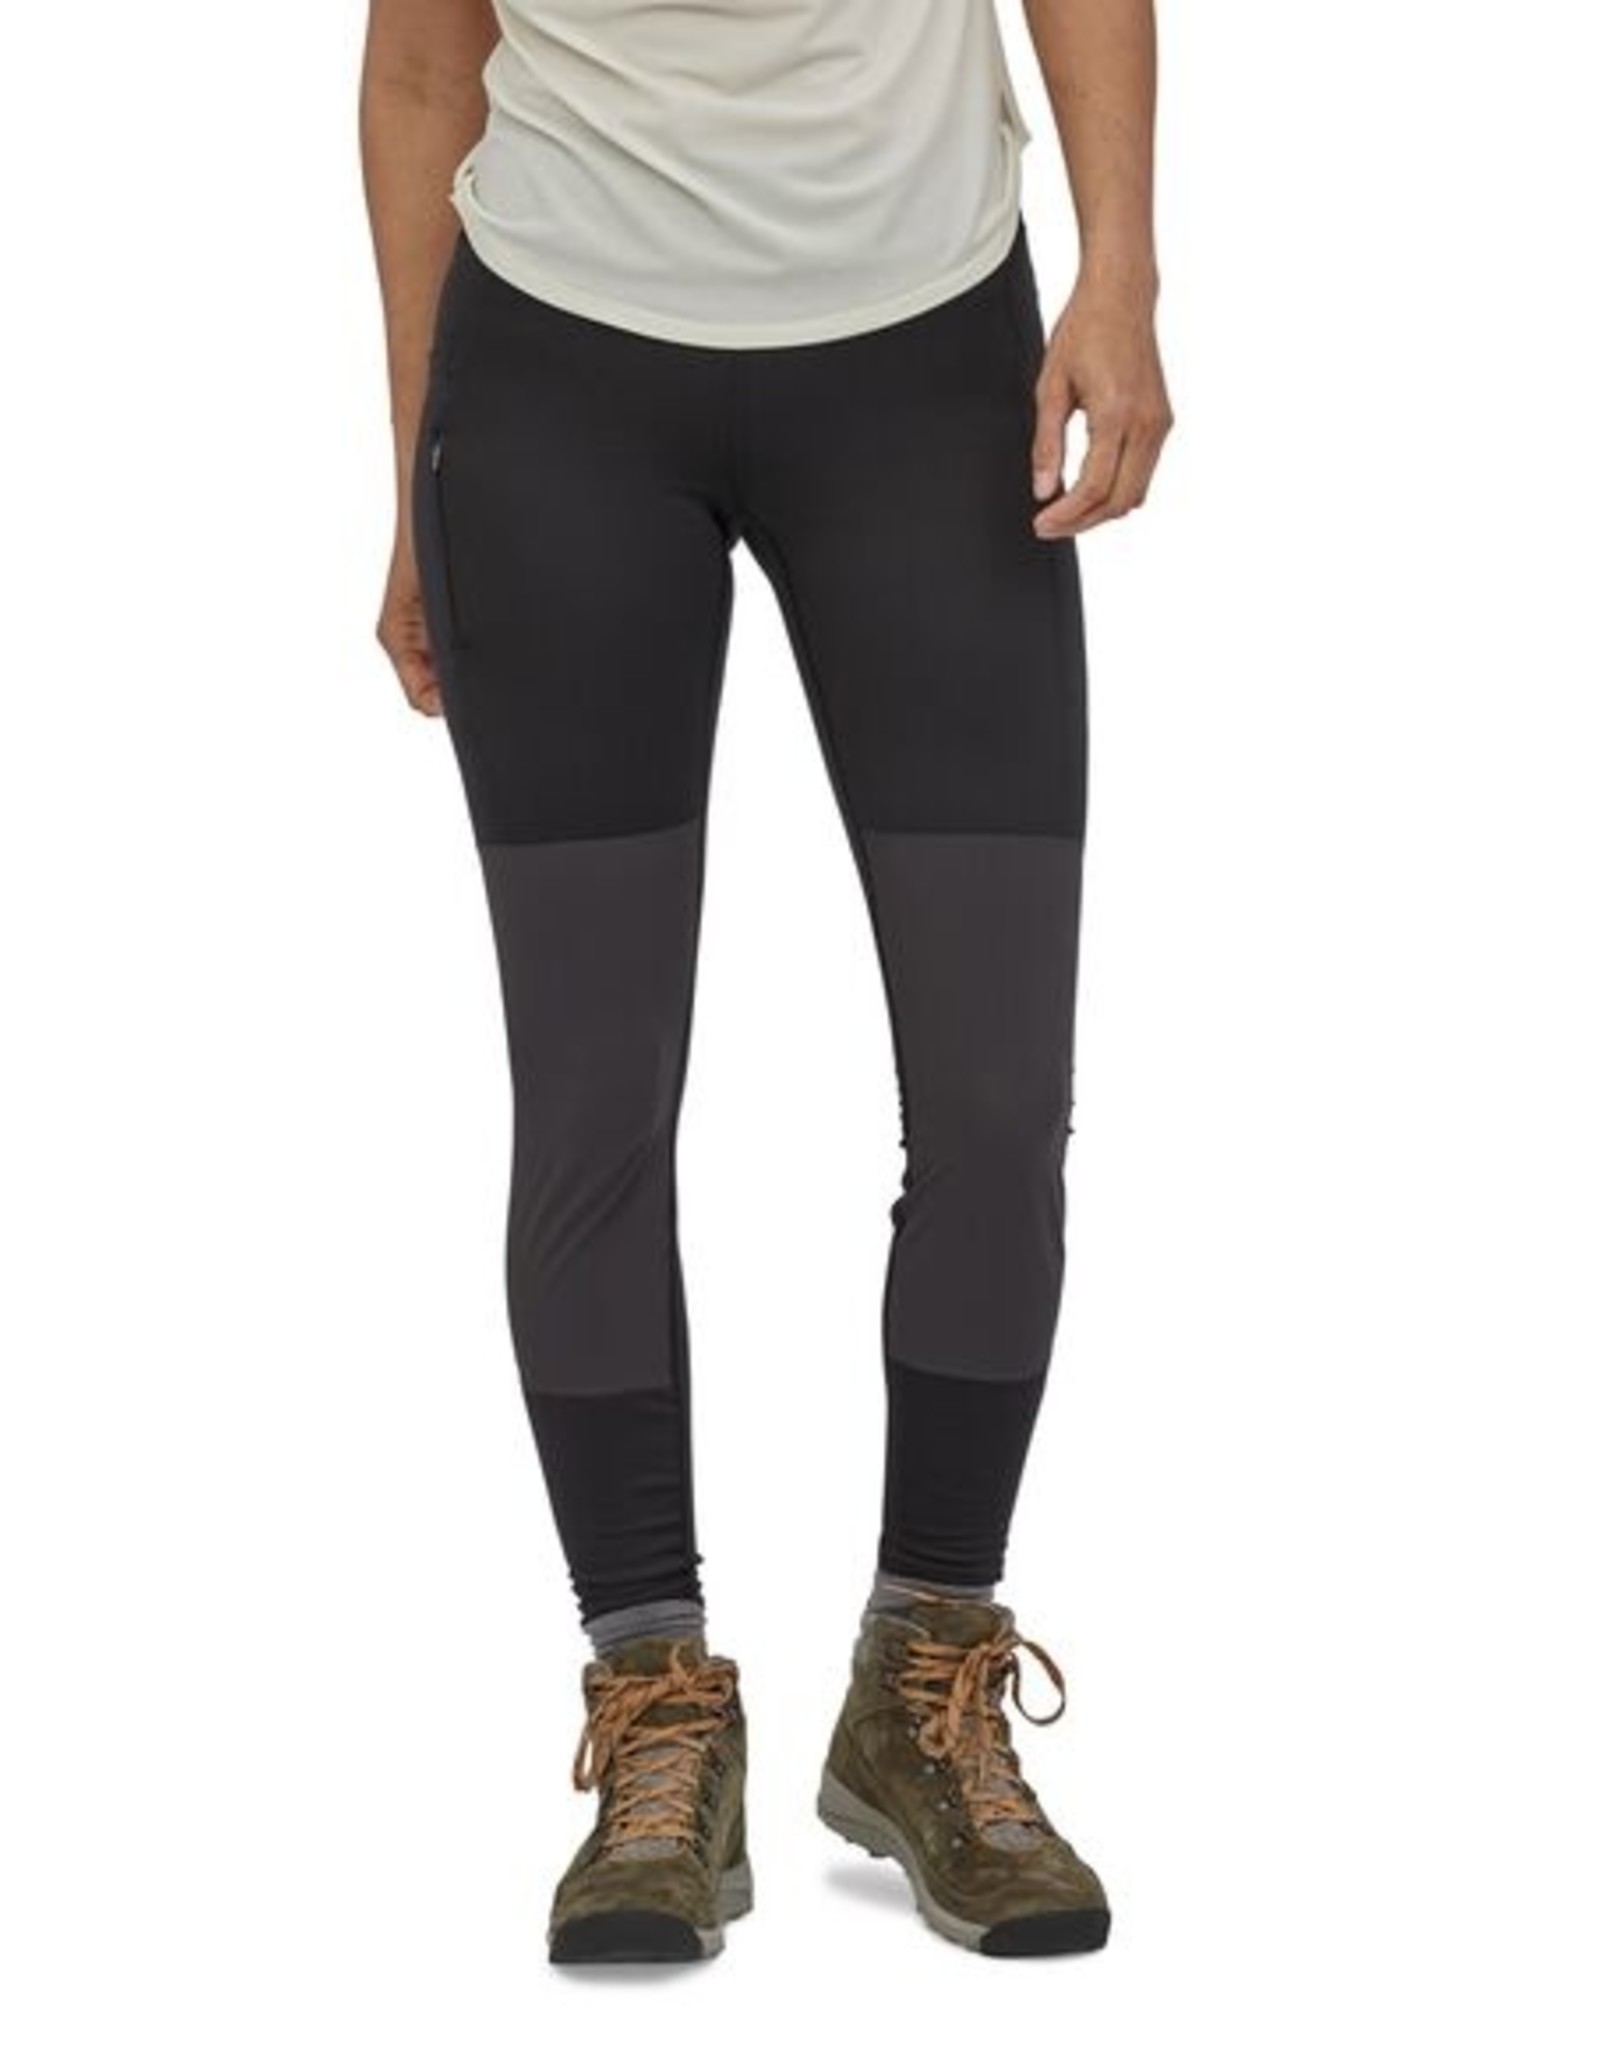 patagonia W's Pack out hike tights (21975)